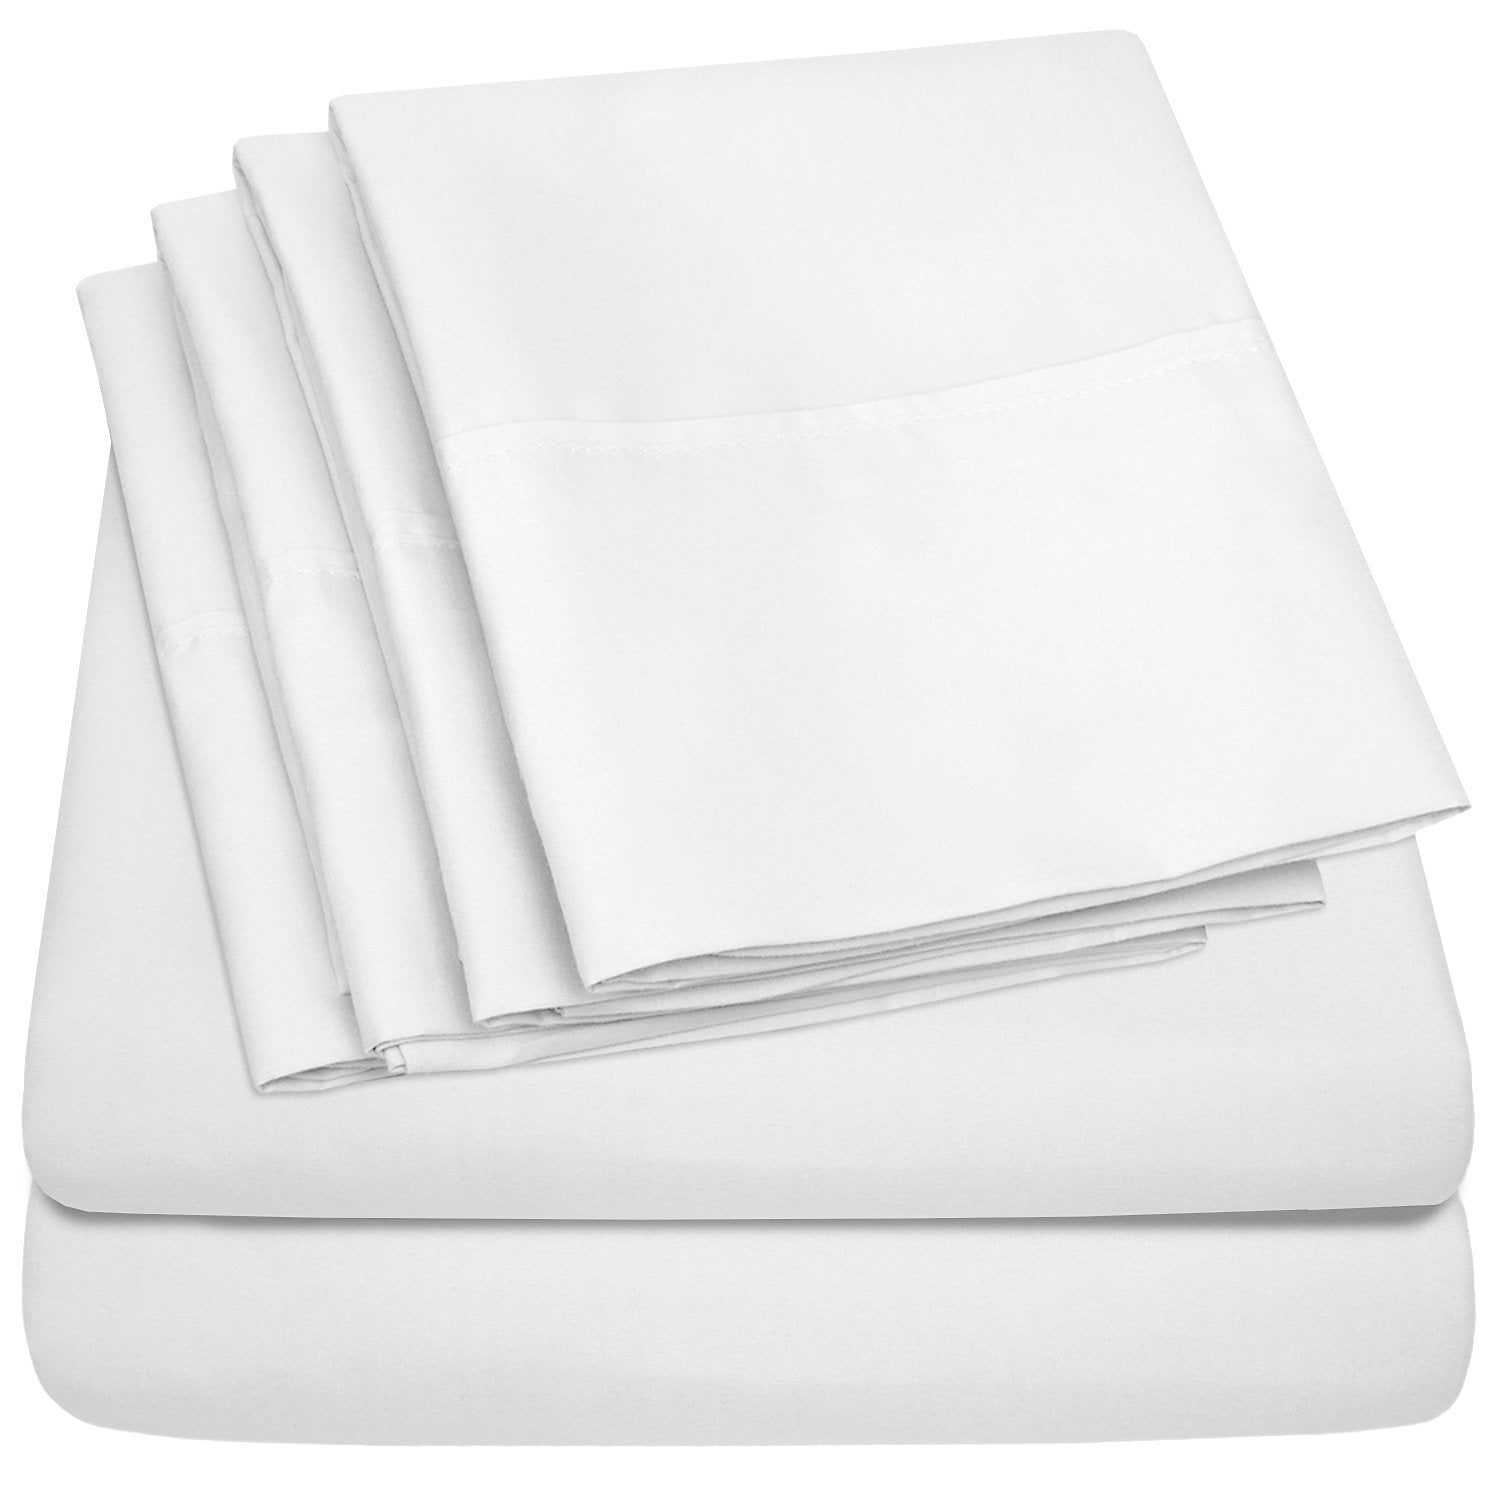 Deluxe 6-Piece Bed Sheet Set (White) - Folded